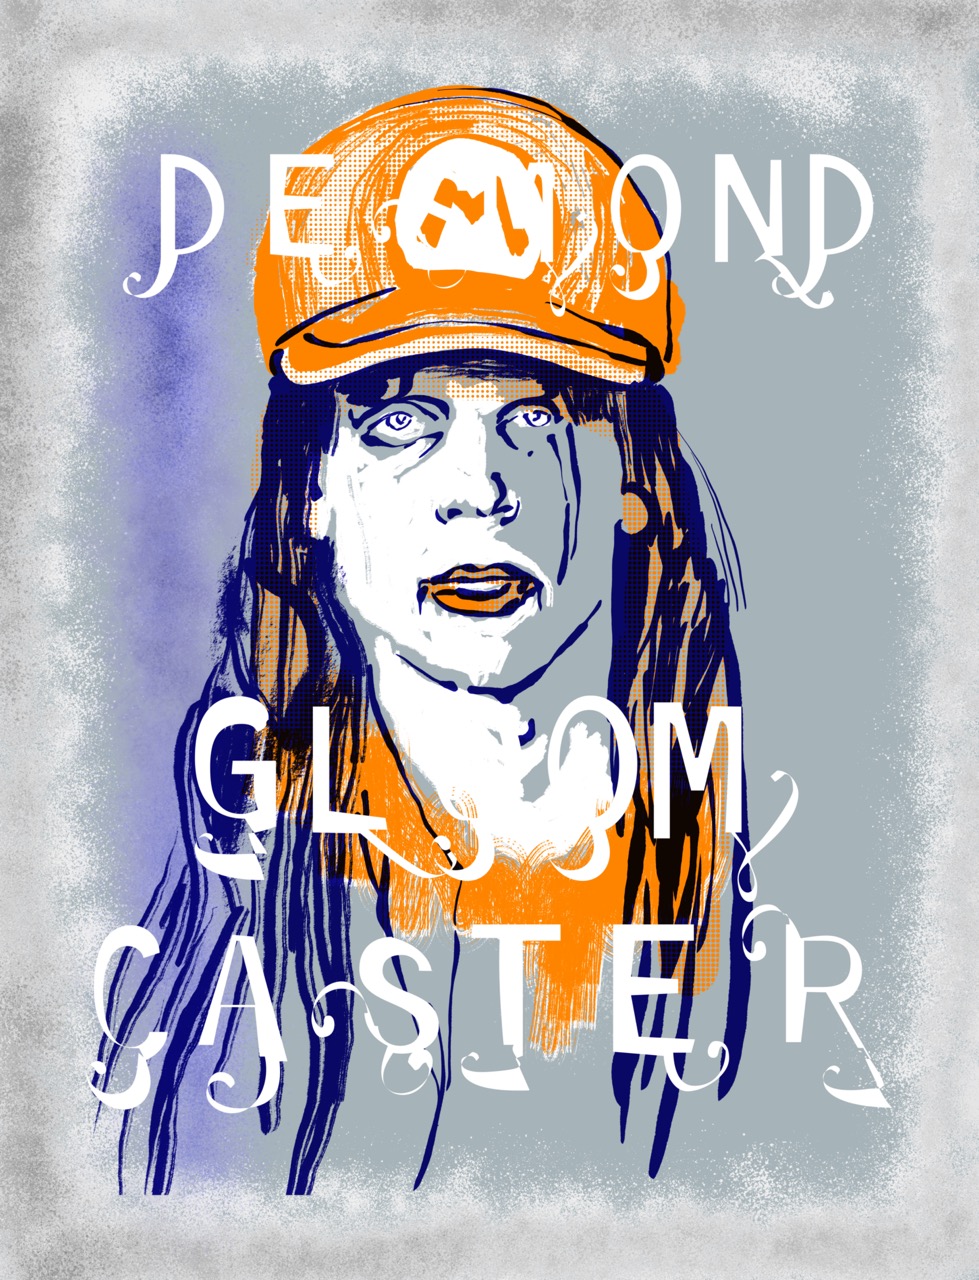 "Desmond Gloomcaster" Timed Edition for February 25, 2024 2021 by Elliott Earls* 19.5 x 25.5" * 3 Spot Colors (1 Spot = Fluorescent "day-glow" color) * Timed Edition (available for 24 hours only) - available from Feb 25, 2024 at 7:08 AM to Feb 26, 2024 at 7:08 AM * Canson Mi-teintes Heavy Weight 100% Cotton Paper with a Deckle Edge * Signed & numbered by the Artist * Released Feb 25, 2024 at 7:08 AM * Hand-Pulled Screenprint * Each print contains unique hand painted elements